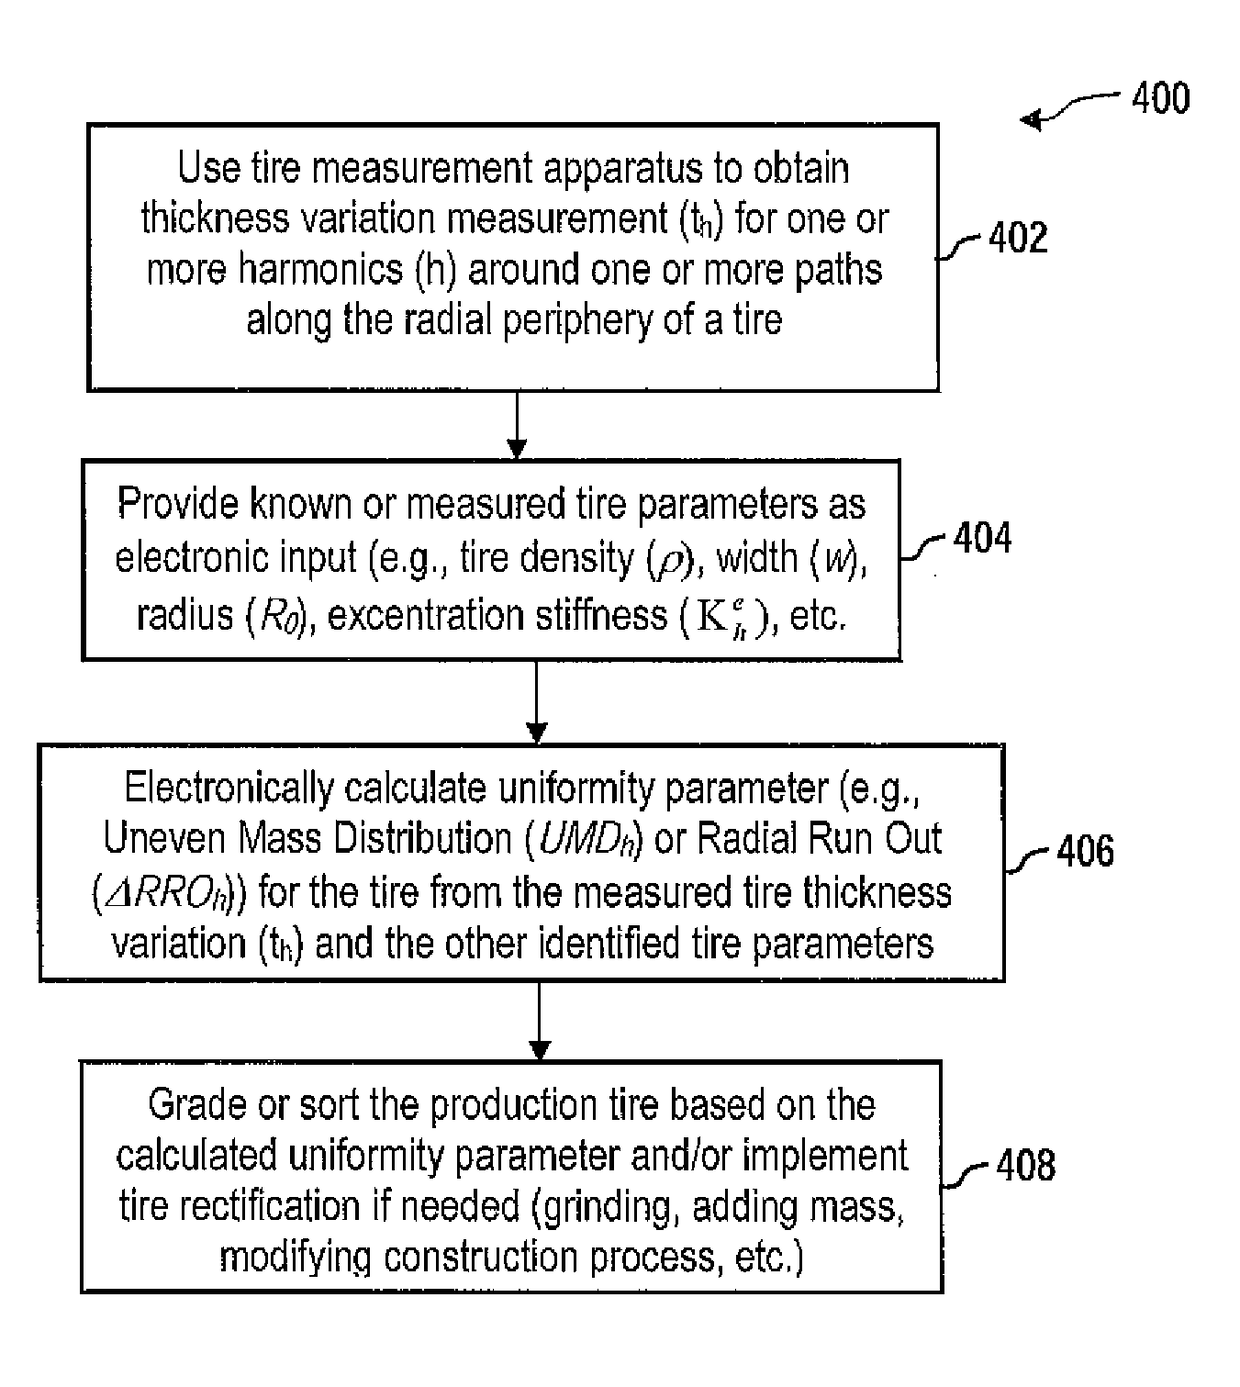 Method for prediction and control of tire uniformity parameters from crown thickness variation